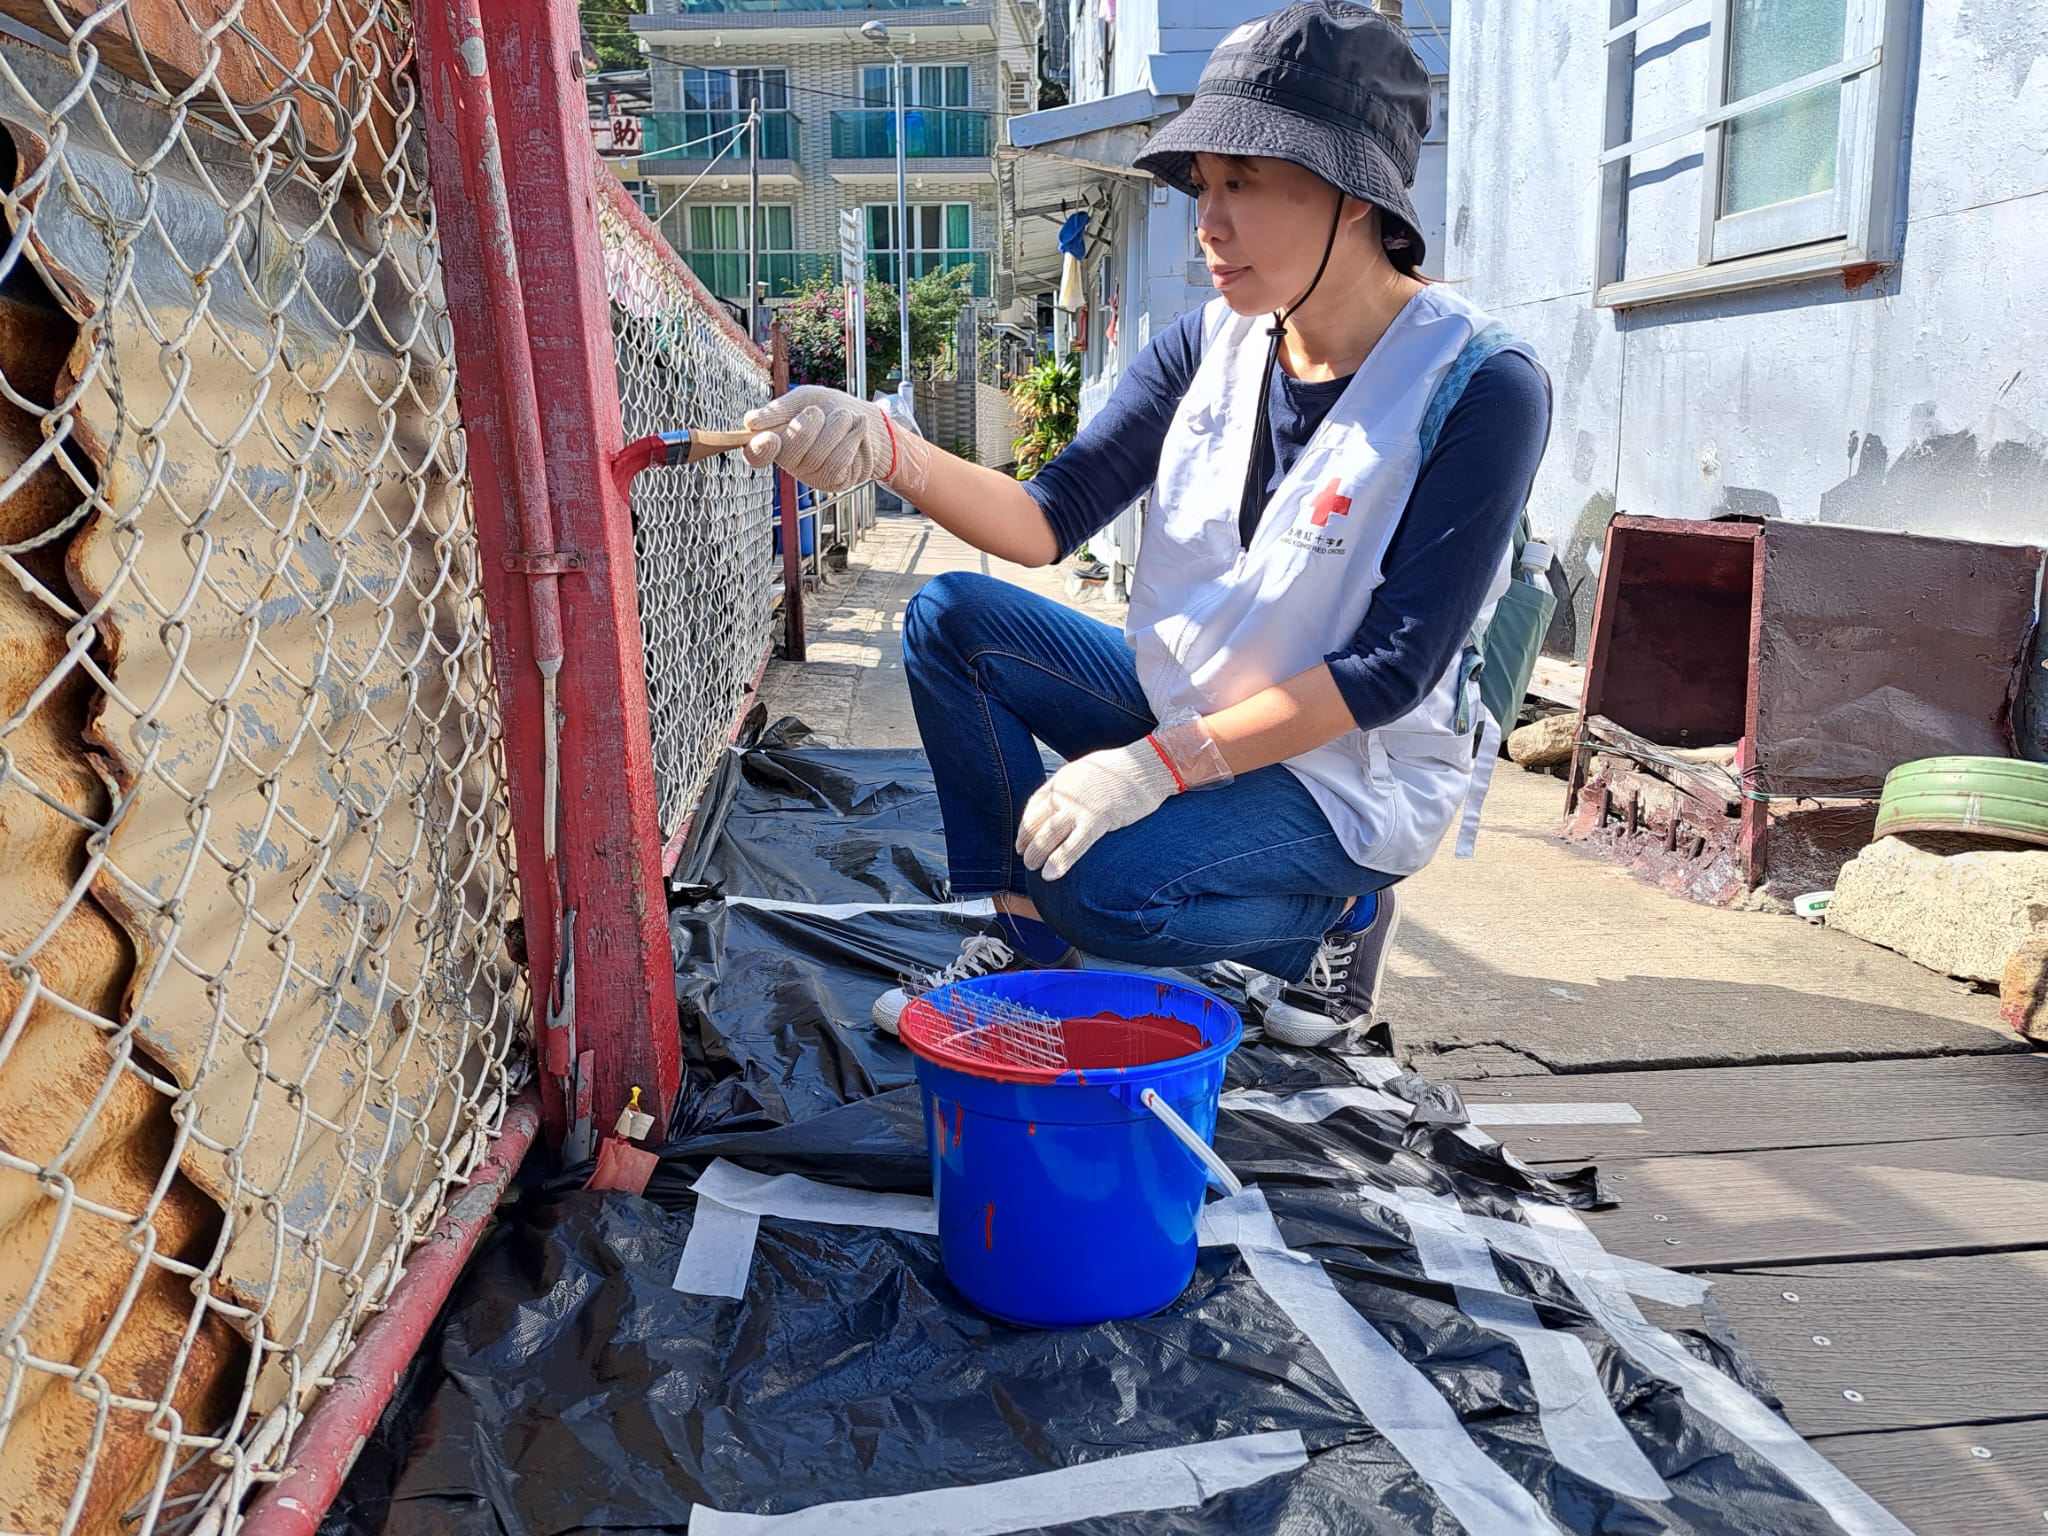 Eva Yeung, wearing a white vest with the Hong Kong Red Cross logo, is seated and crouching down, painting the metal poles of a welded wire fence red.